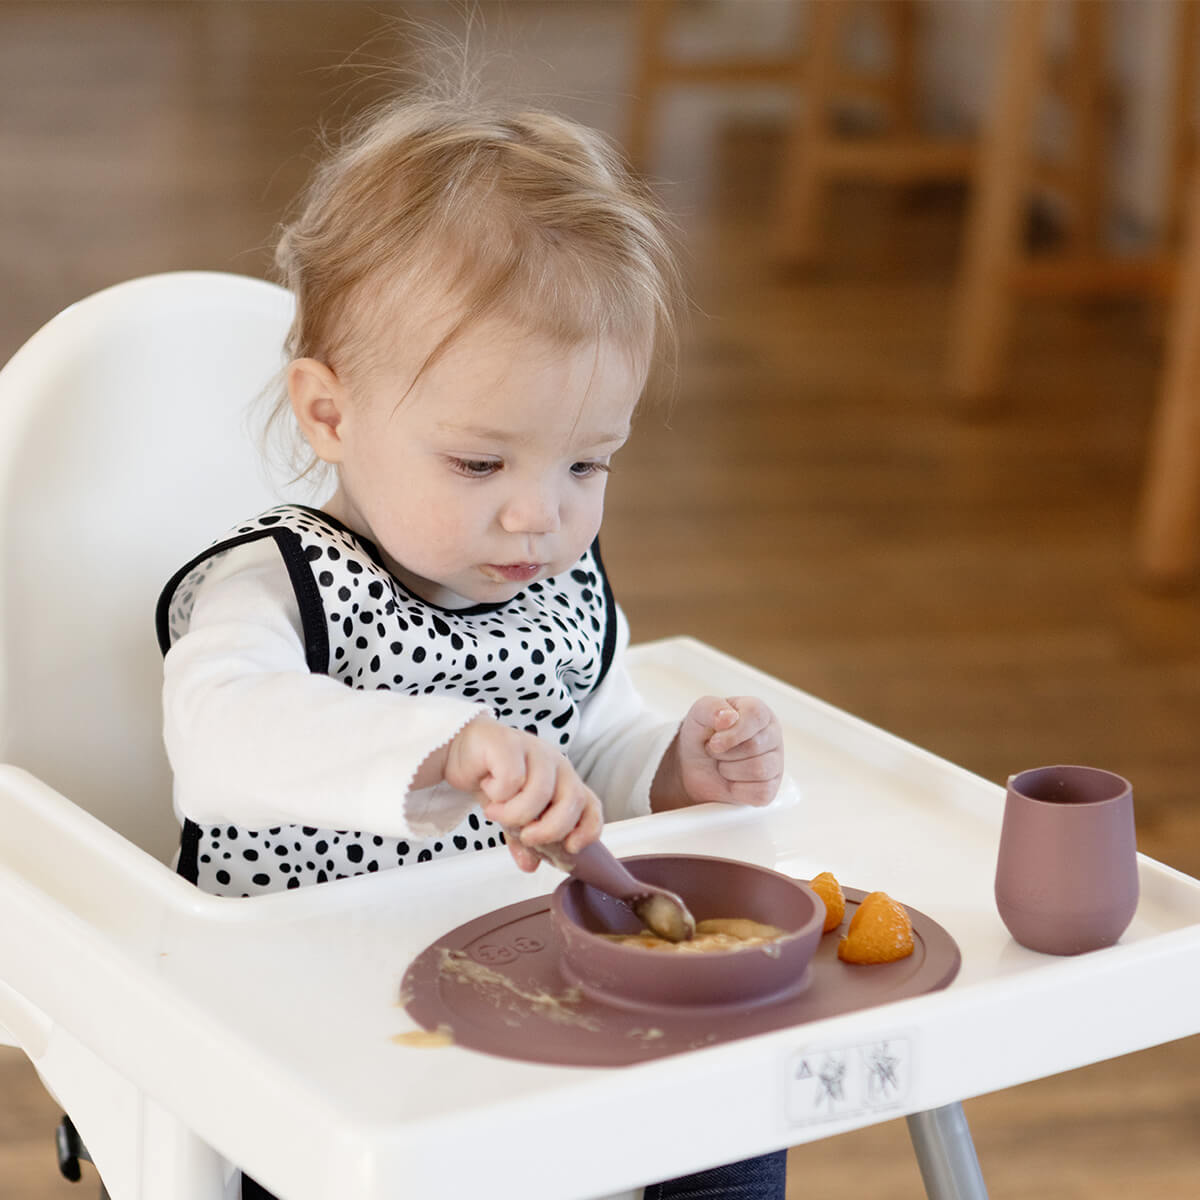 First Foods Set in Mauve by ezpz / The Original All-In-One Silicone Plates & Placemats that Stick to the Table